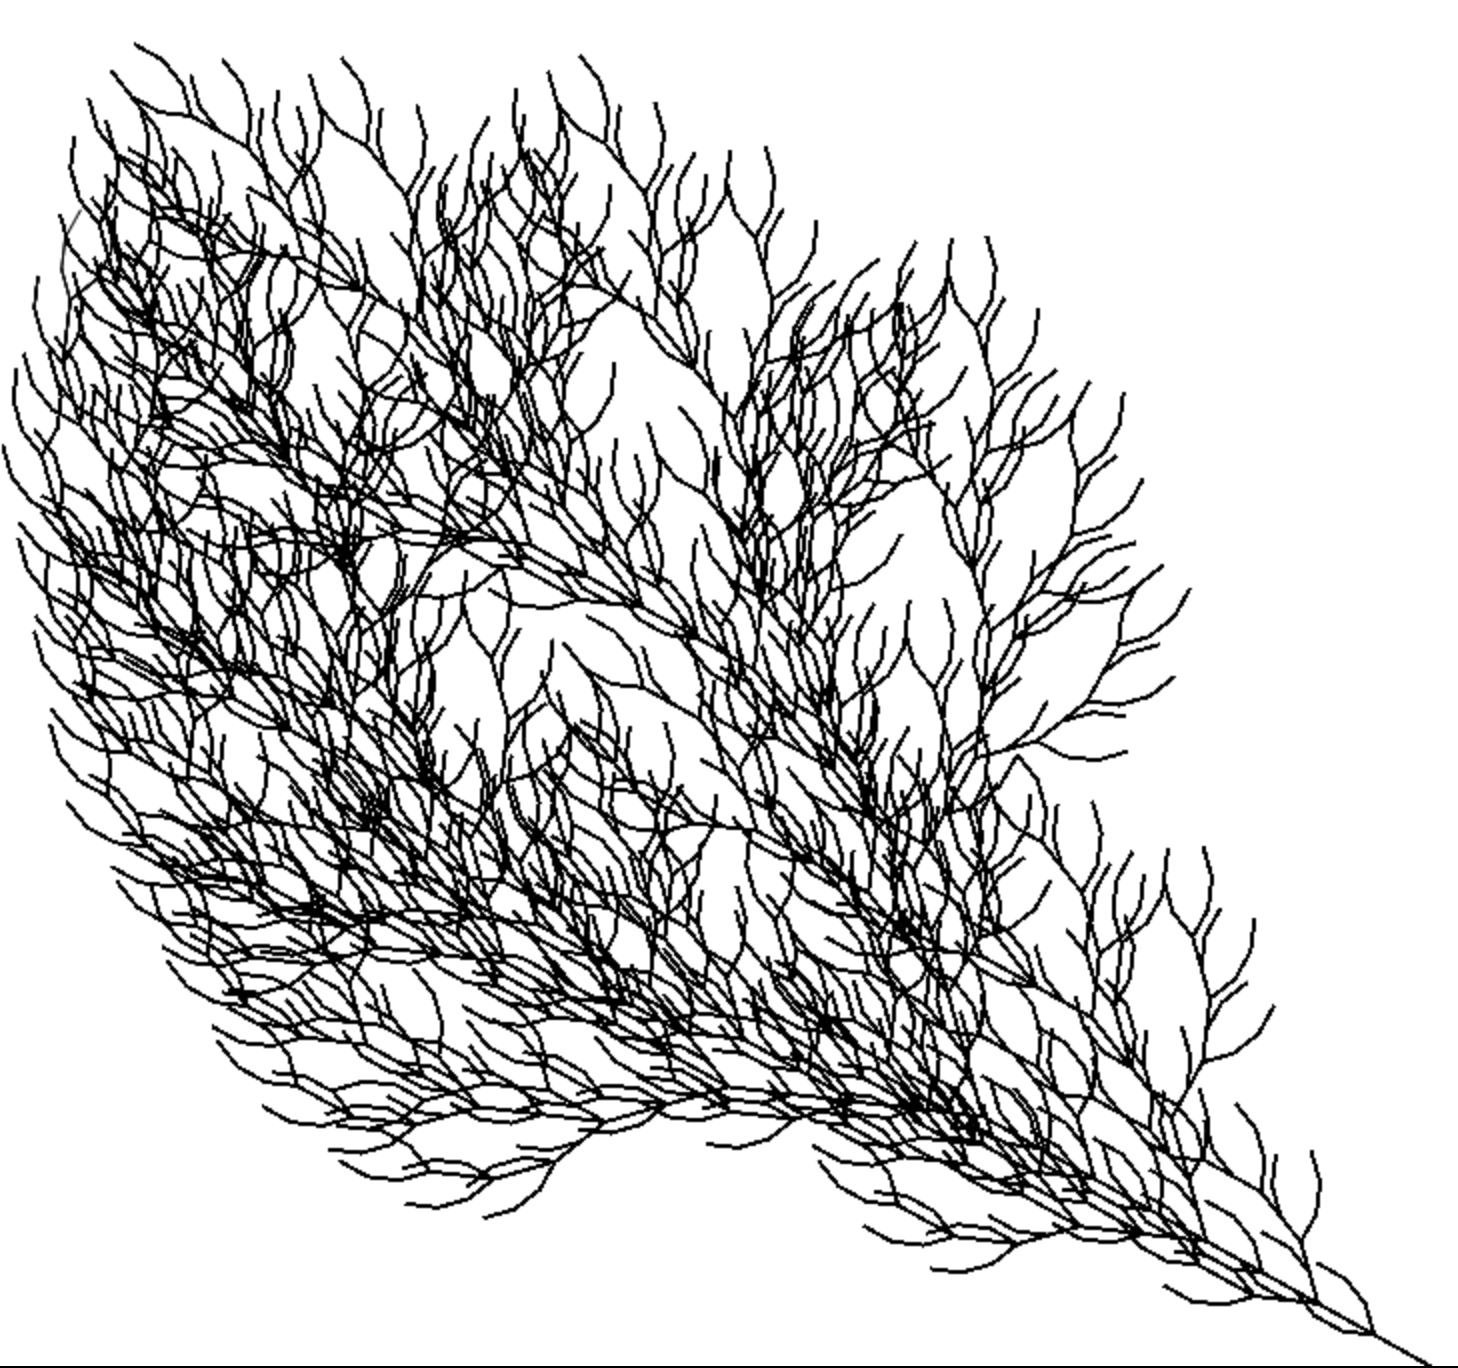 Fractal Curve Tree (5 iterations)